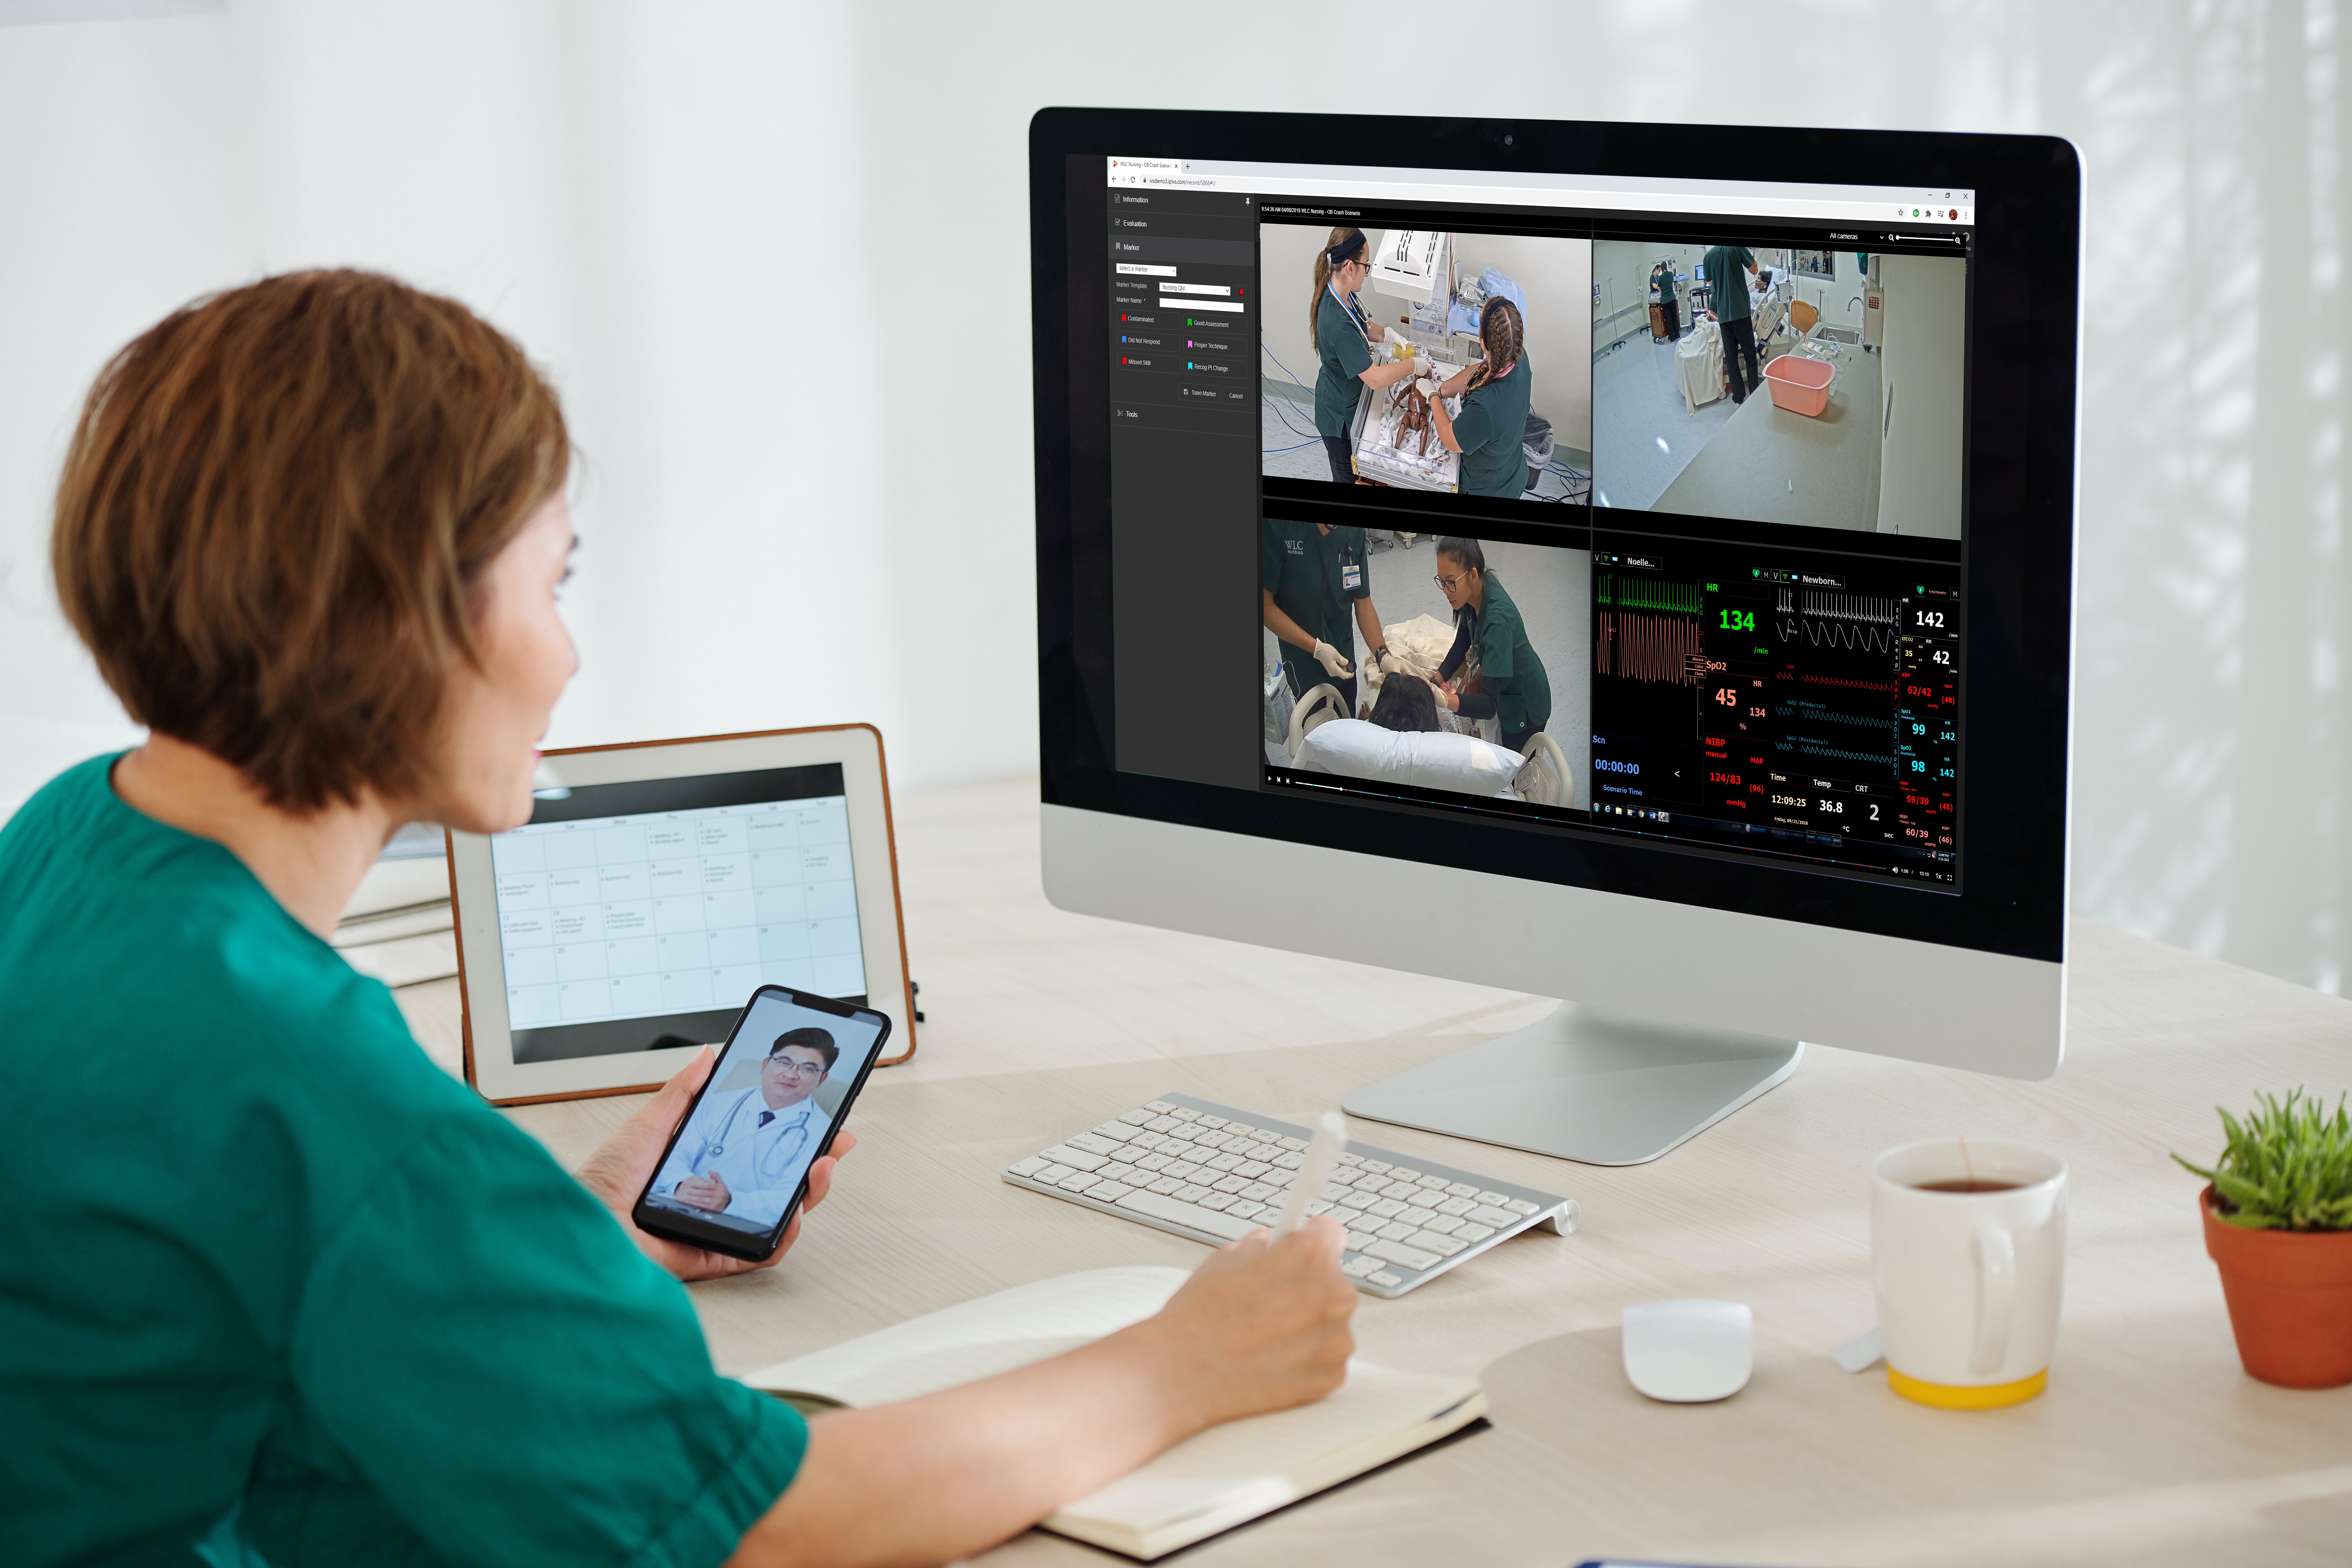 Features a Video Recording System Software should have to help Manage Video Content?